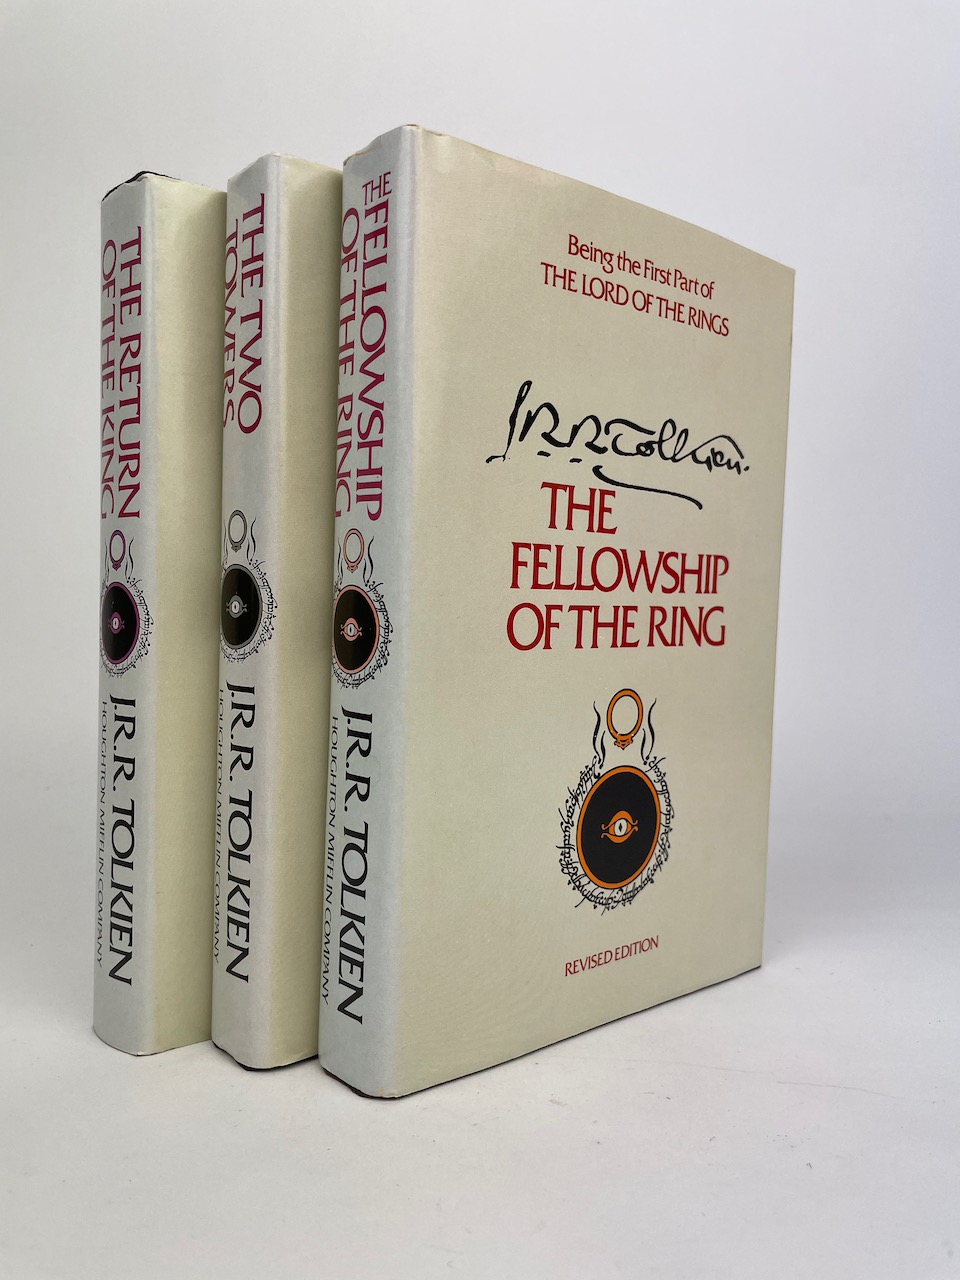 The Lord of the Rings JRR Tolkien Signature set from 1978, by Houghton Mifflin 12